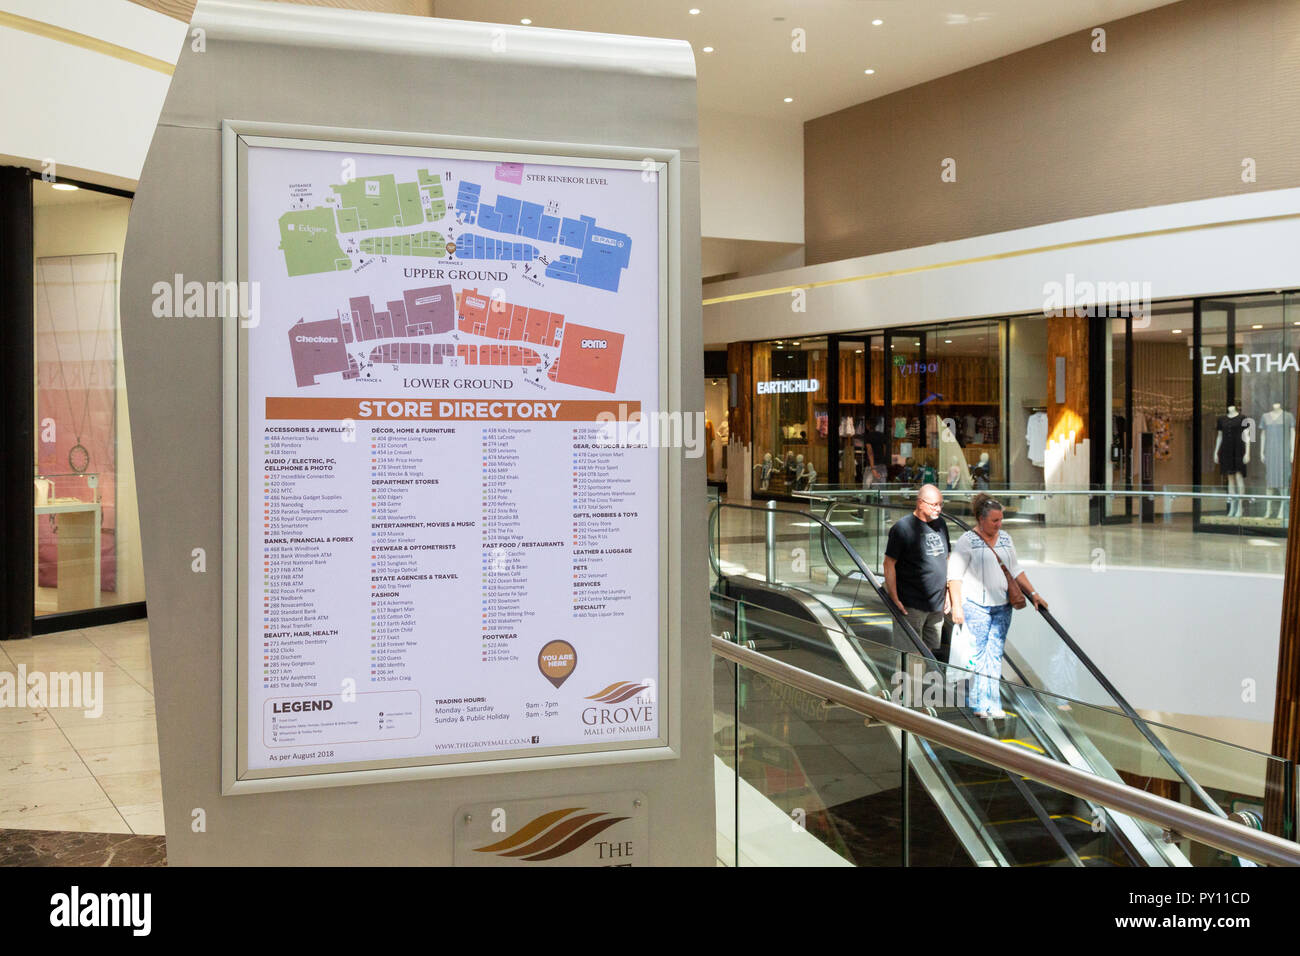 In scena la Grove Shopping Mall, un moderno centro commerciale, a Windhoek, Namibia Africa Foto Stock